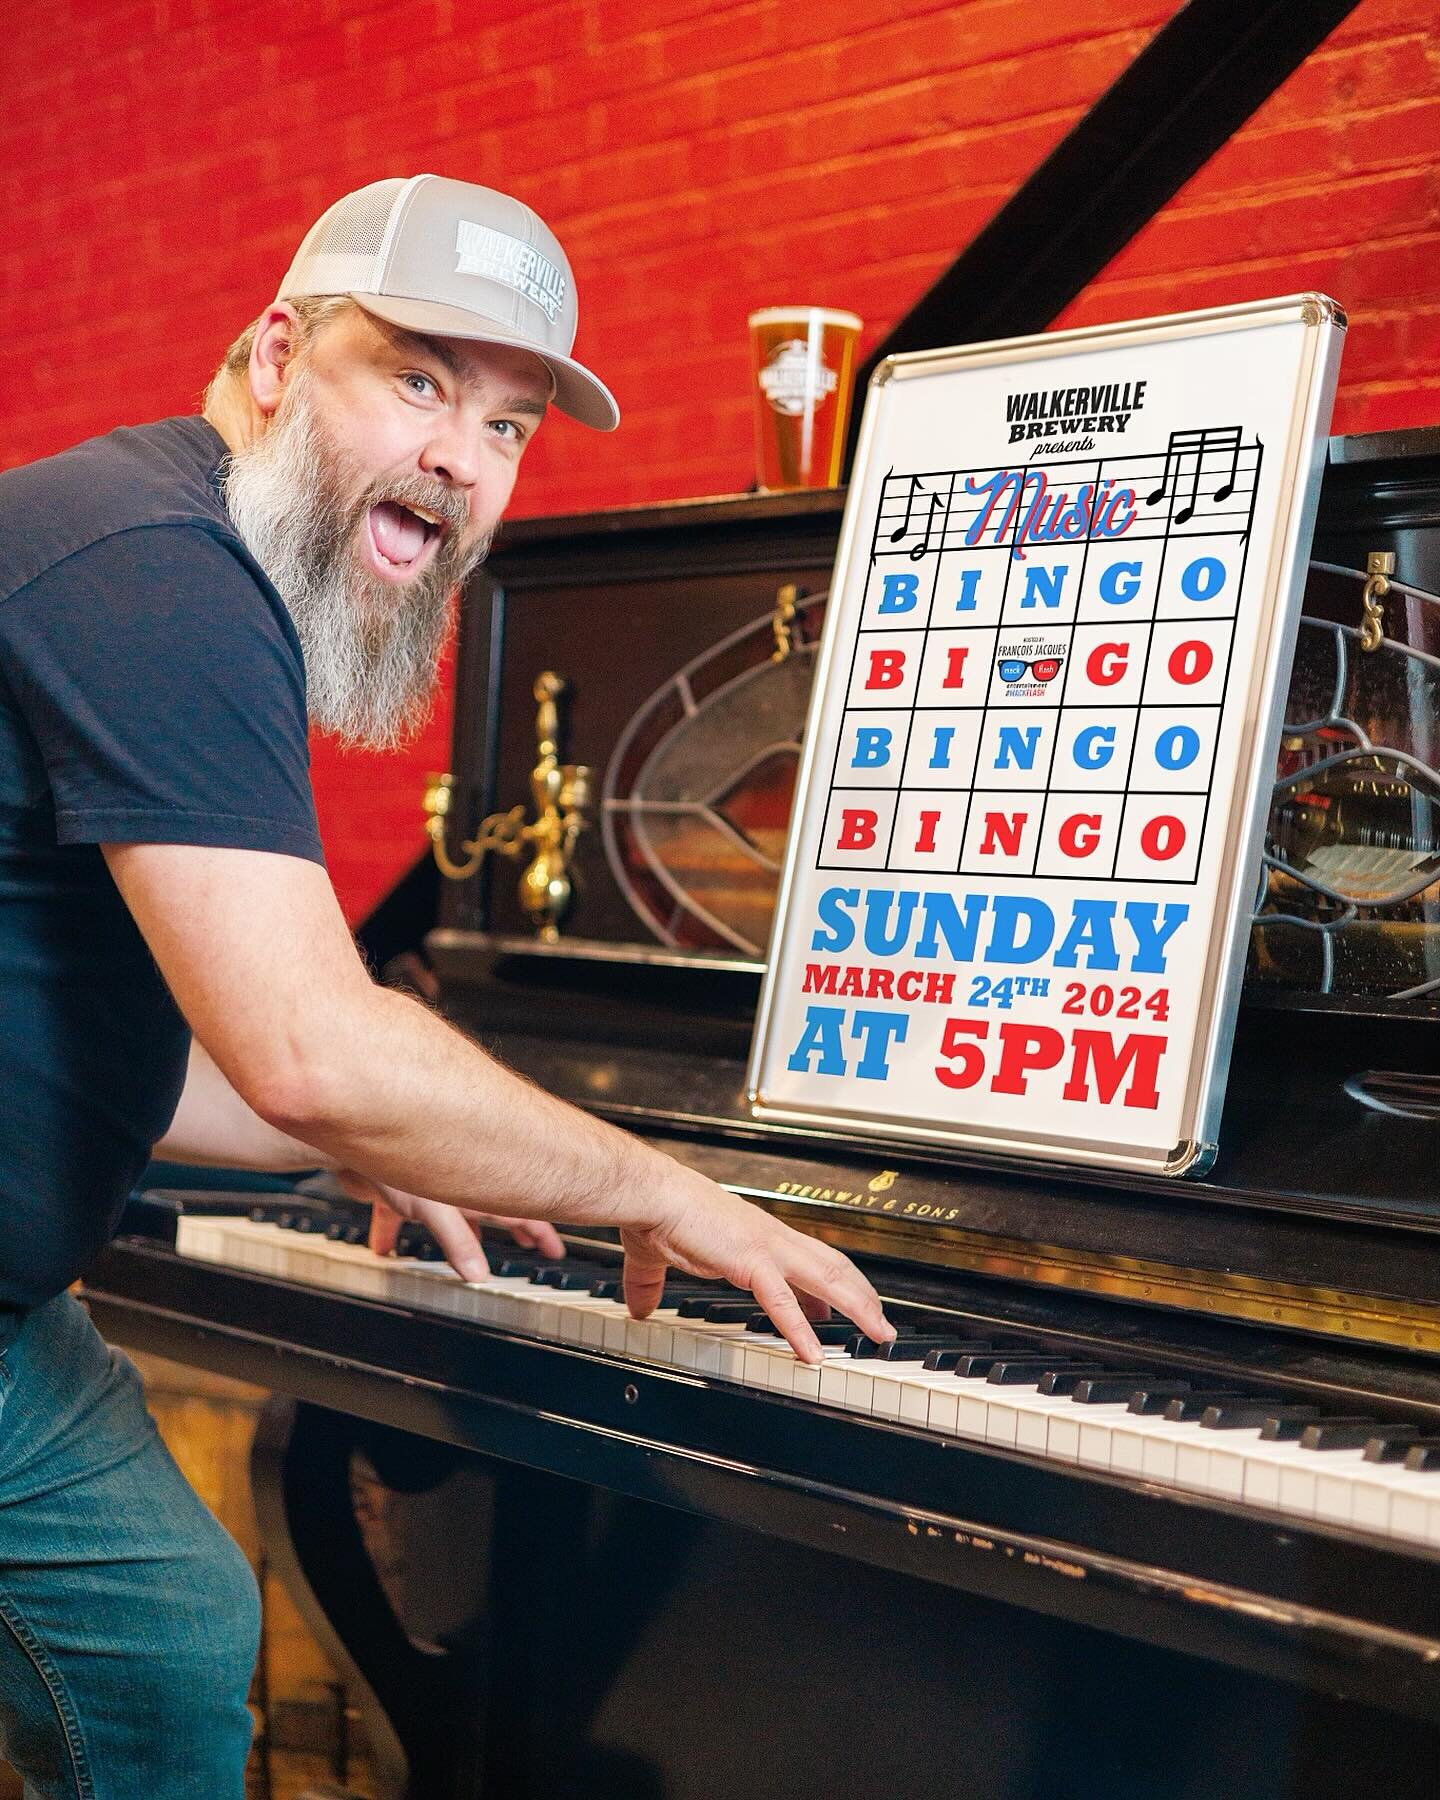 B-I-N-G-O! 🎶

Join us for Music Bingo Trivia THIS Sunday, March 24th at 5pm with your host @mackflash! A night filled with a little bit of bingo, a little bit of trivia and a whole lot of music!

Music Bingo Trivia is always free to play and great p